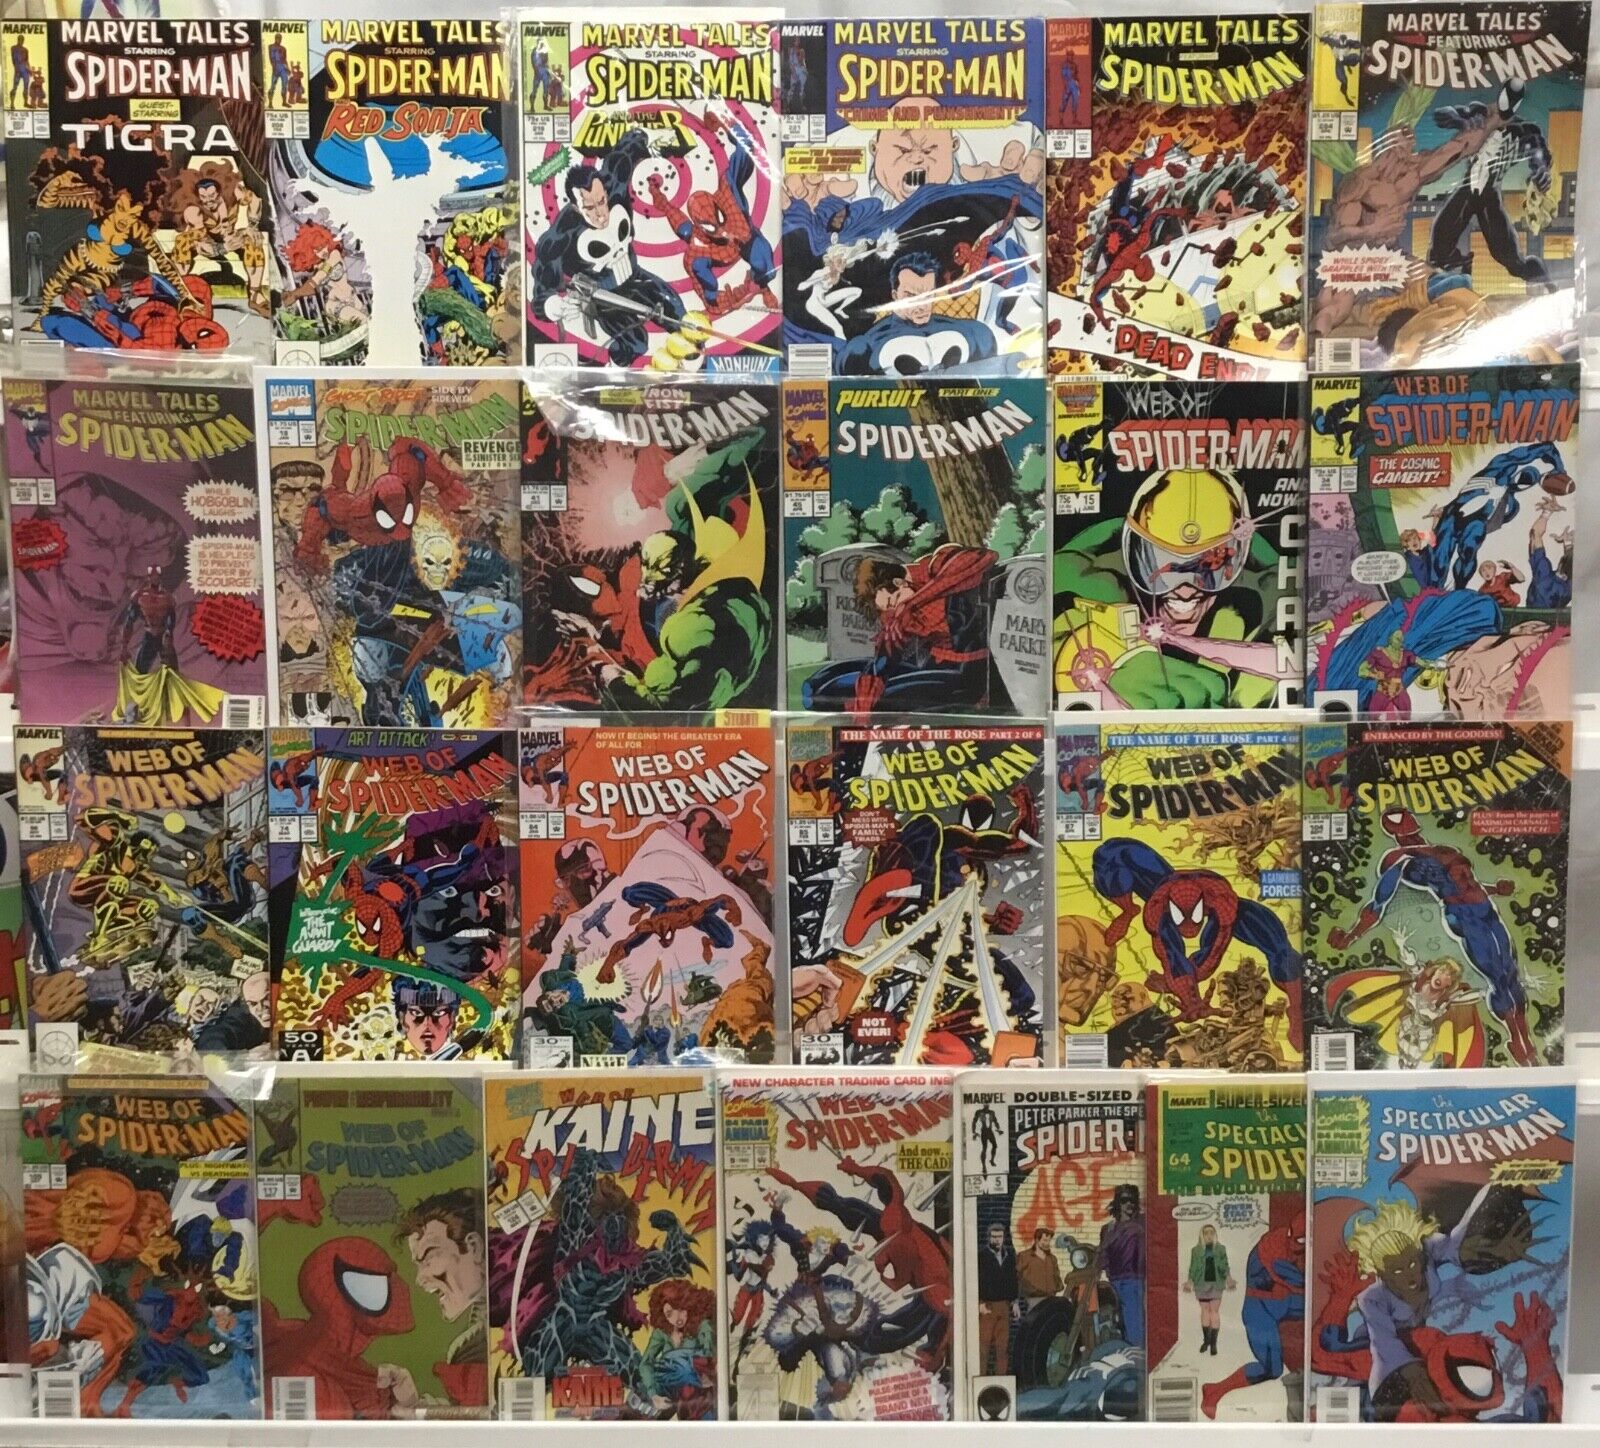 Marvel Comics - Spider-Man - Comic Book Lot of 25 Issues - Web of, Marvel Tales